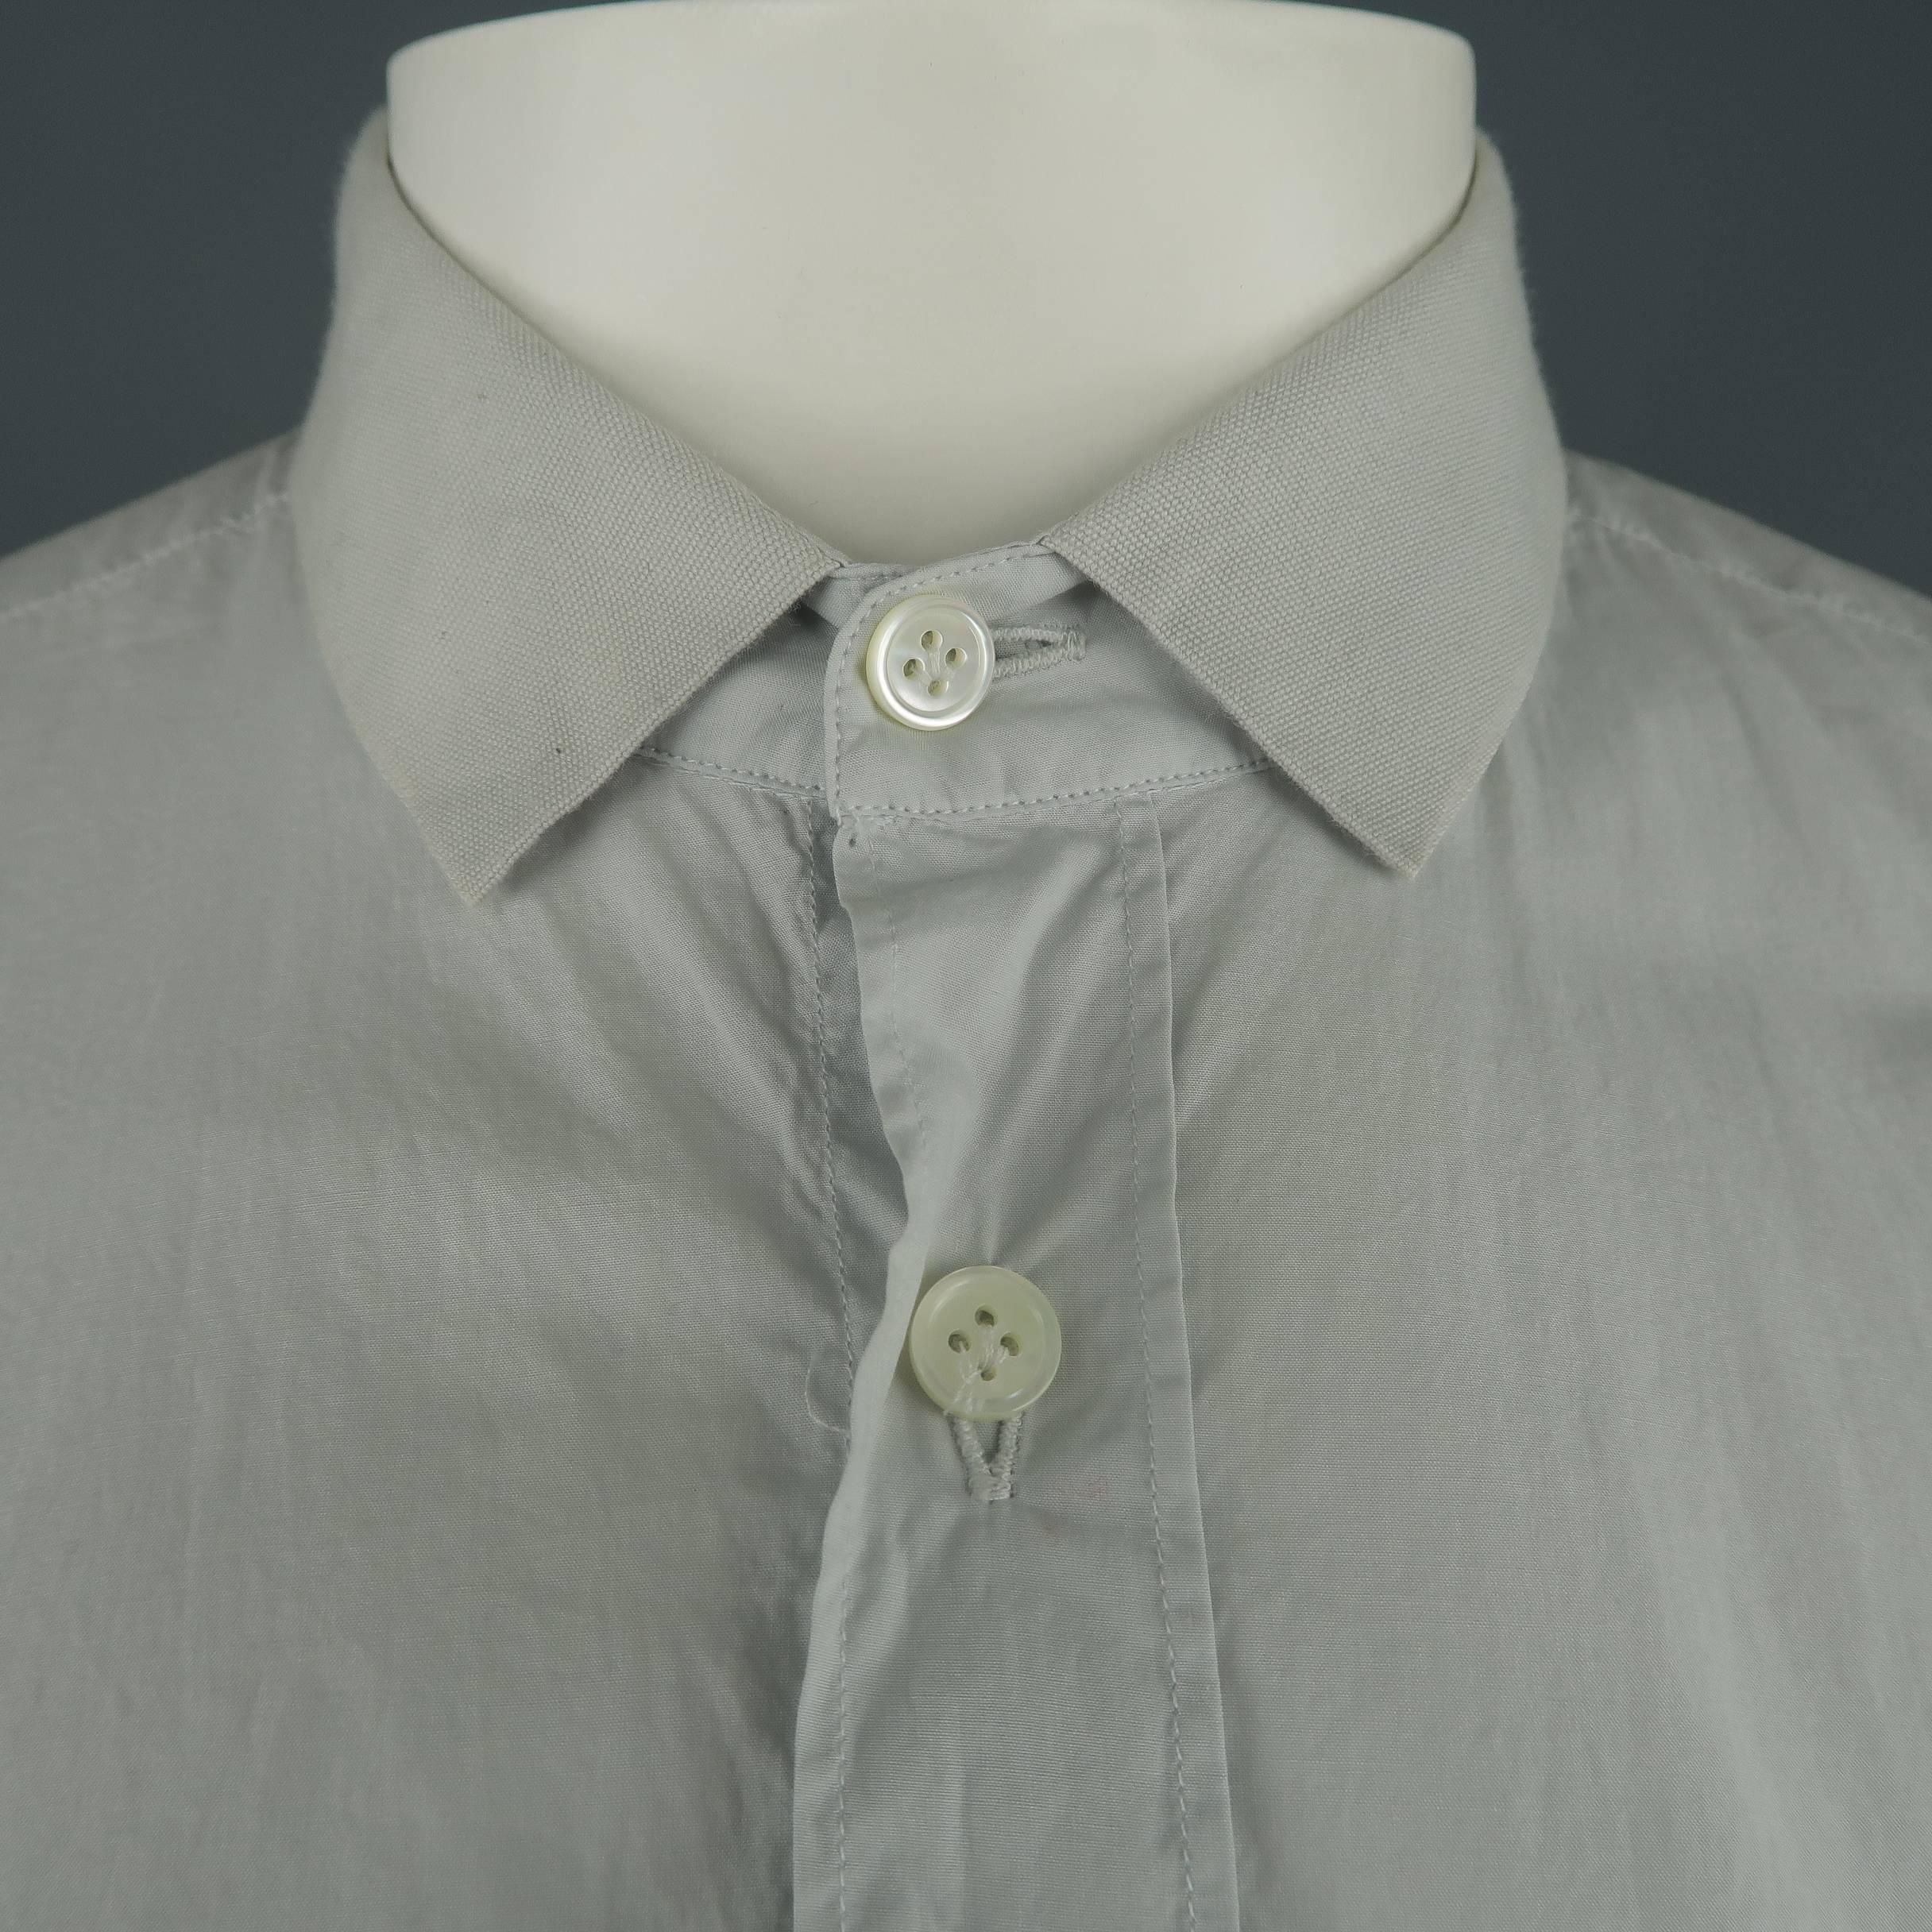 LANVIN shirt comes in light gray cotton with a canvas ribbon collar. Made in Italy.
 
Good Pre-Owned Condition.
Marked: 41  15
 
Measurements:
 
Shoulder: 17 in.
Chest: 44 in.
Sleeve: 26 in.
Length: 29 in.
